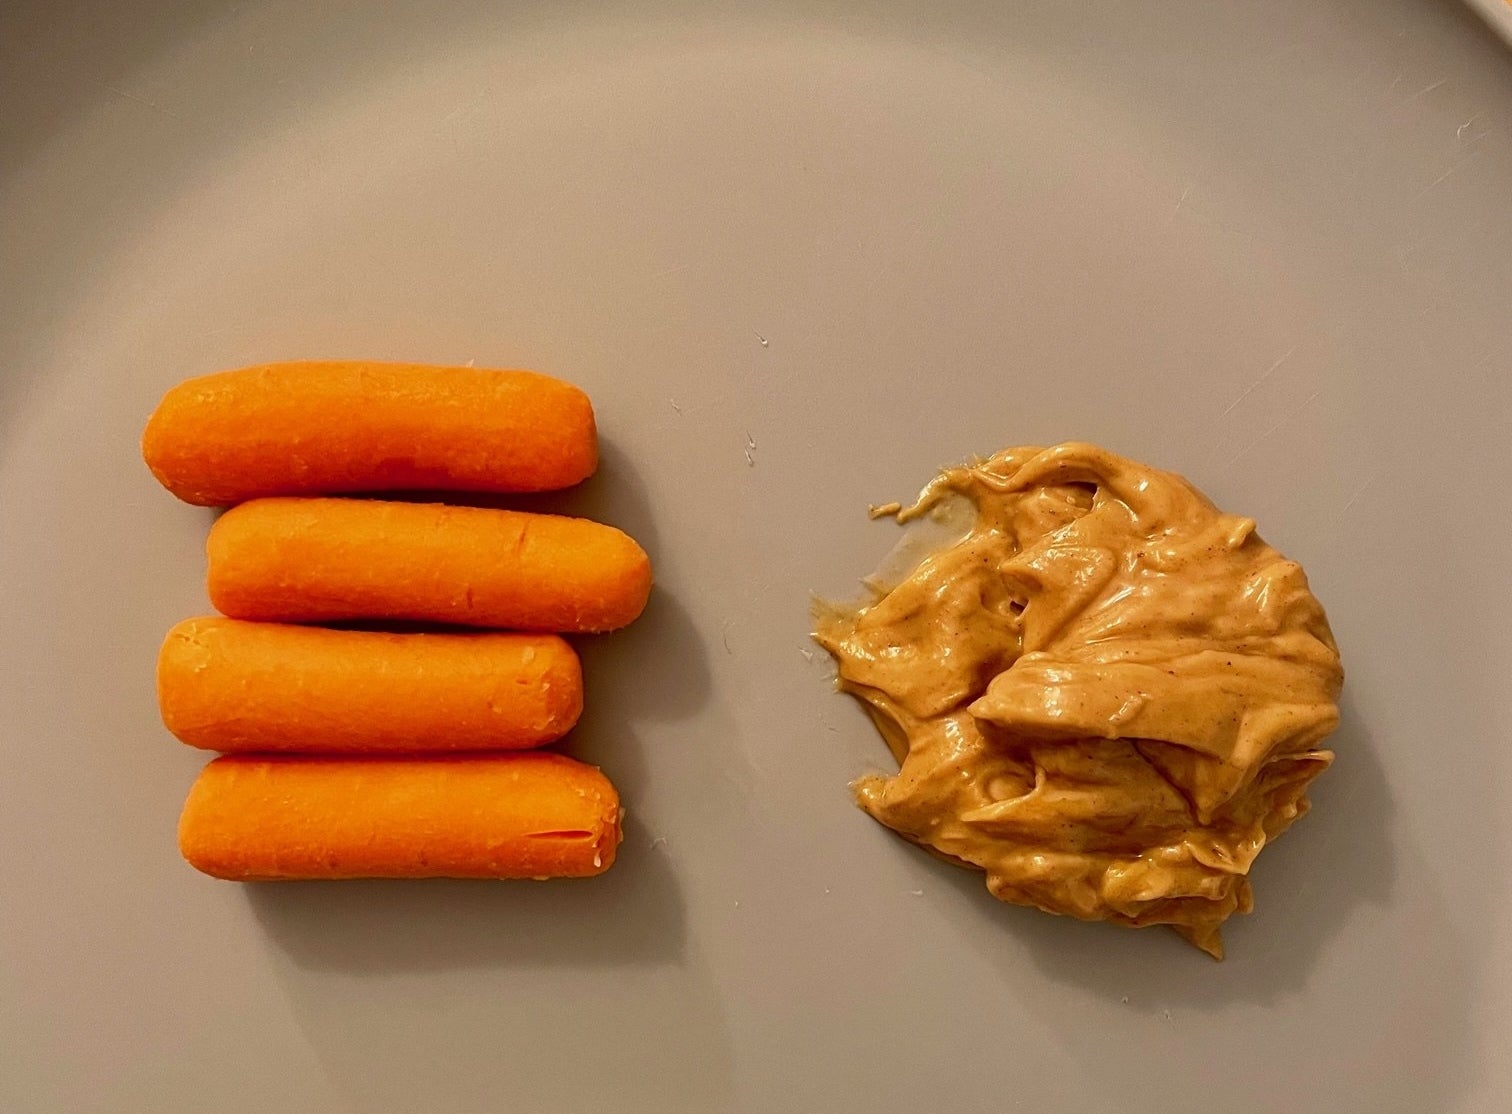 Baby carrots and peanut butter